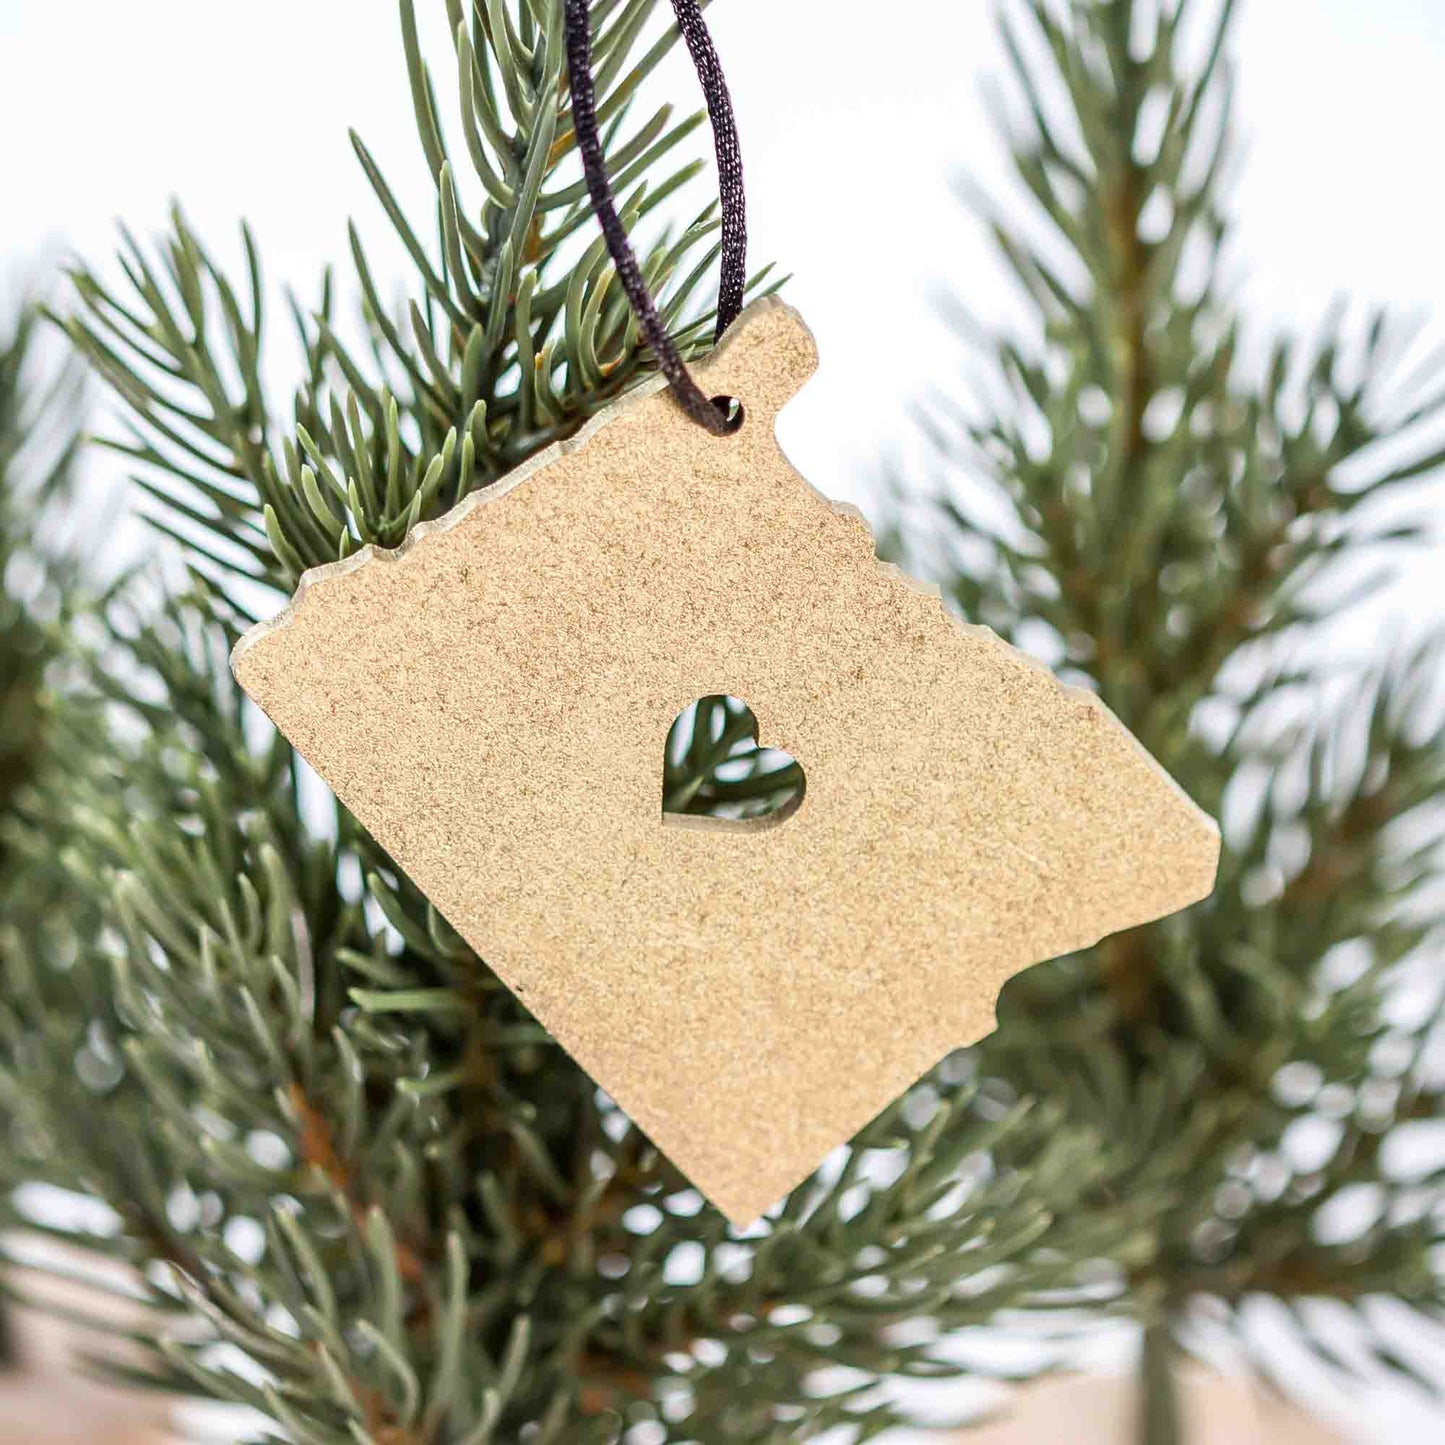 State Christmas Ornaments: Oregon Love in Metallic Gold by LeeMo Designs in Bend, Oregon